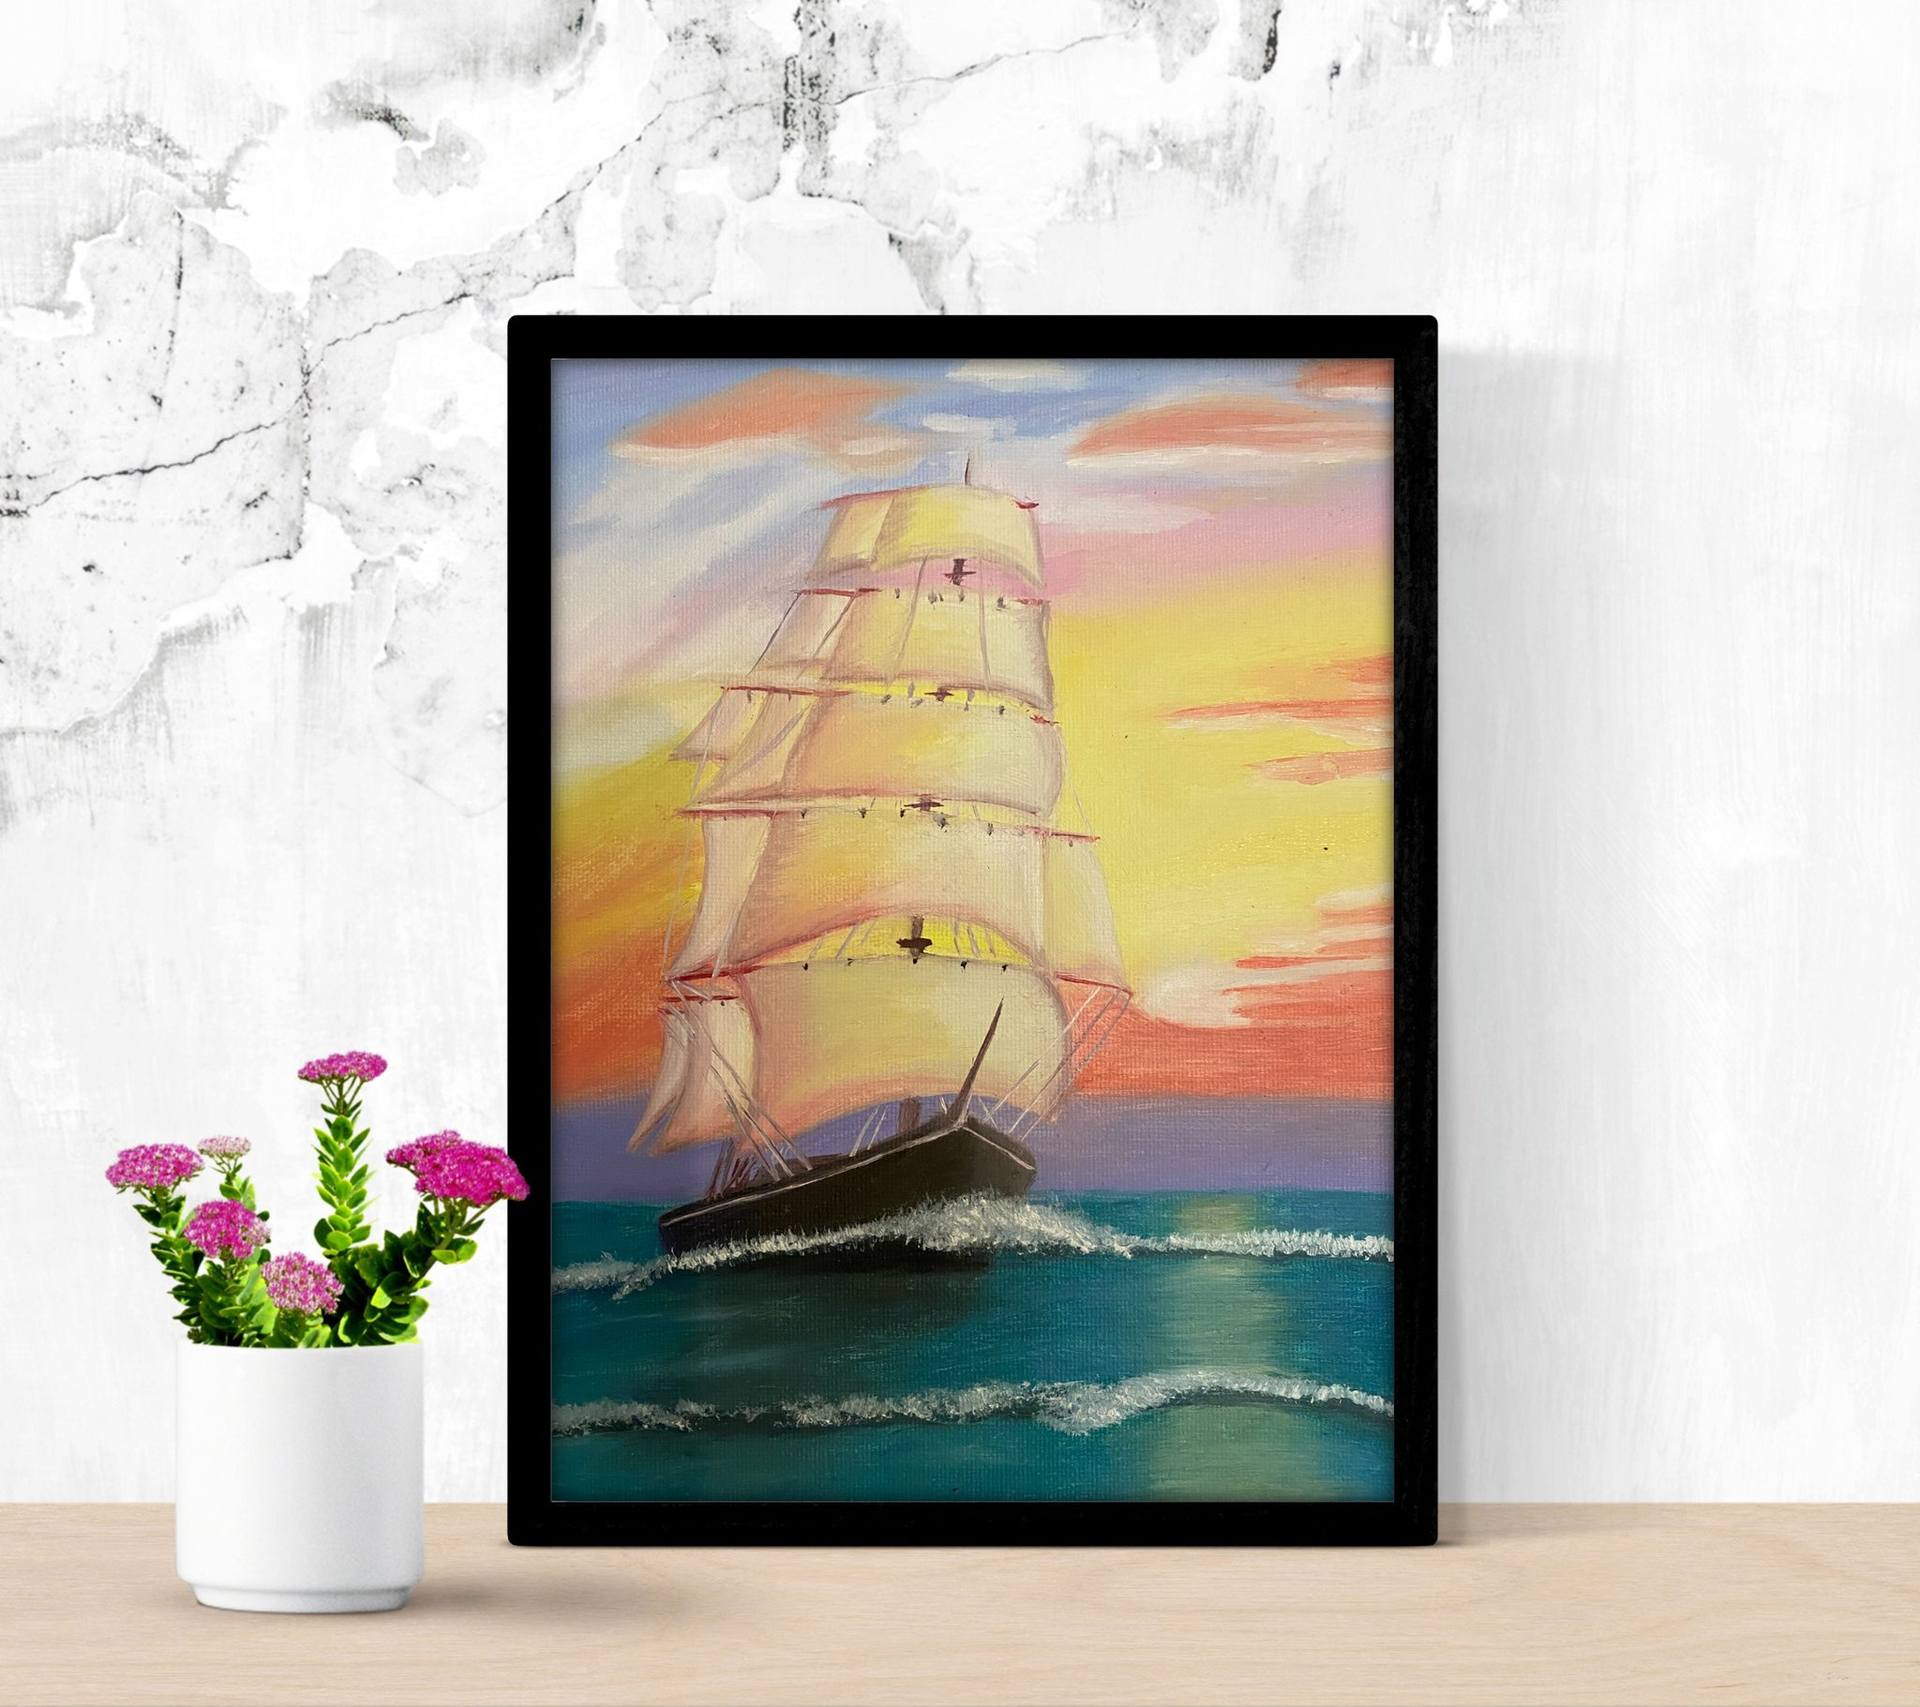 Sailboat Abstract Painting Impasto Original Acrylic Painting Art Seascape Nautical Painting 11 by 14 on Stretched Canvas